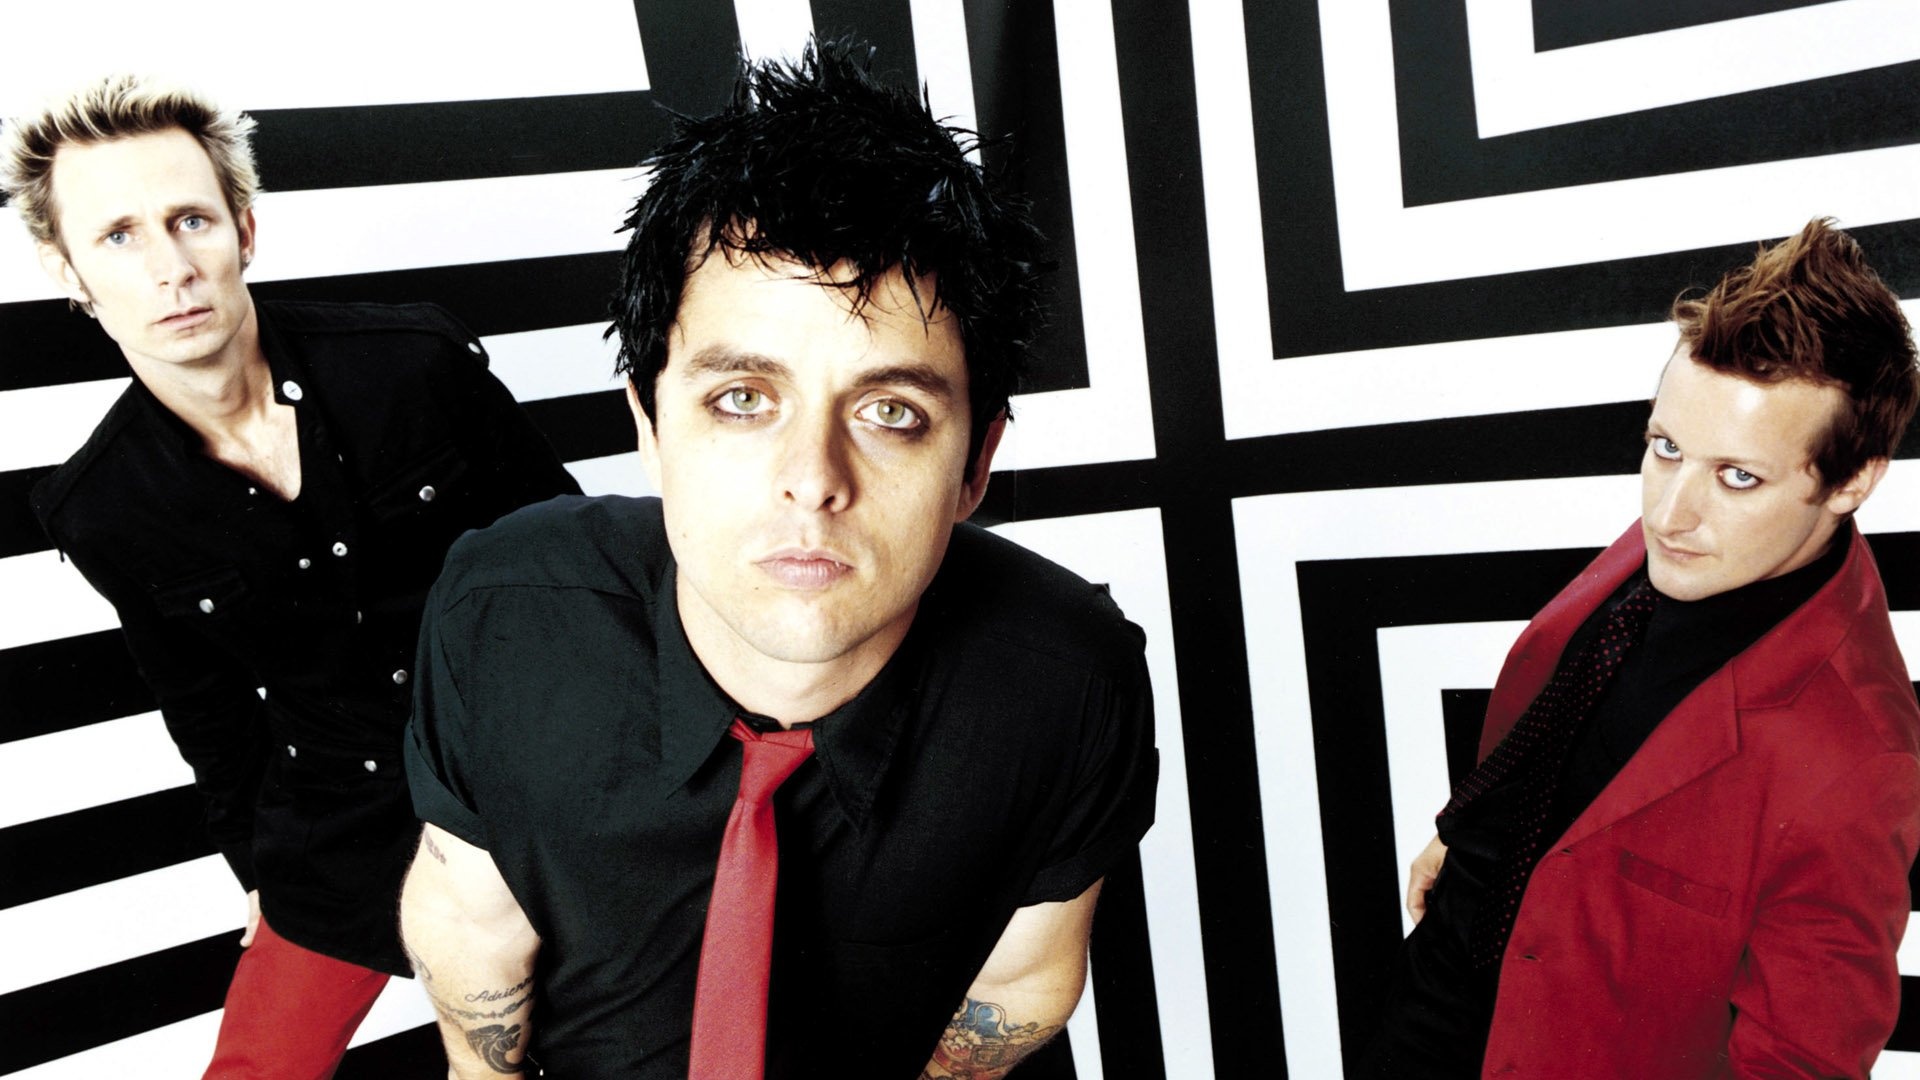 Green Day (Band): Billie Joe Armstrong, Mike Dirnt, Tre Cool - the power trio and the leading members of the group. 1920x1080 Full HD Background.